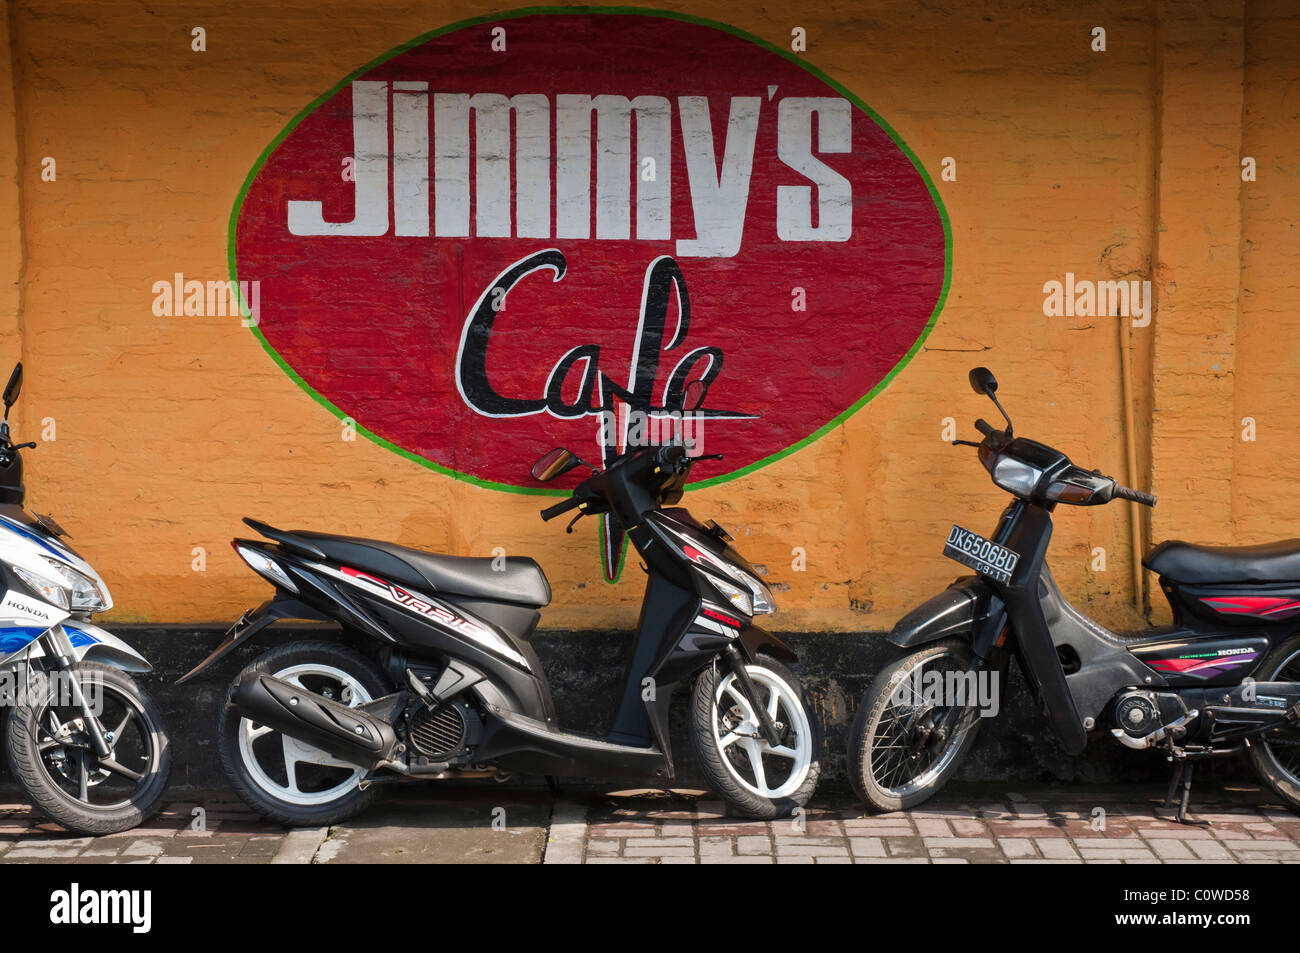 Motor scooters parked outiside well known bar Jimmy's Cafe in Sanur Bali Indonesia Stock Photo